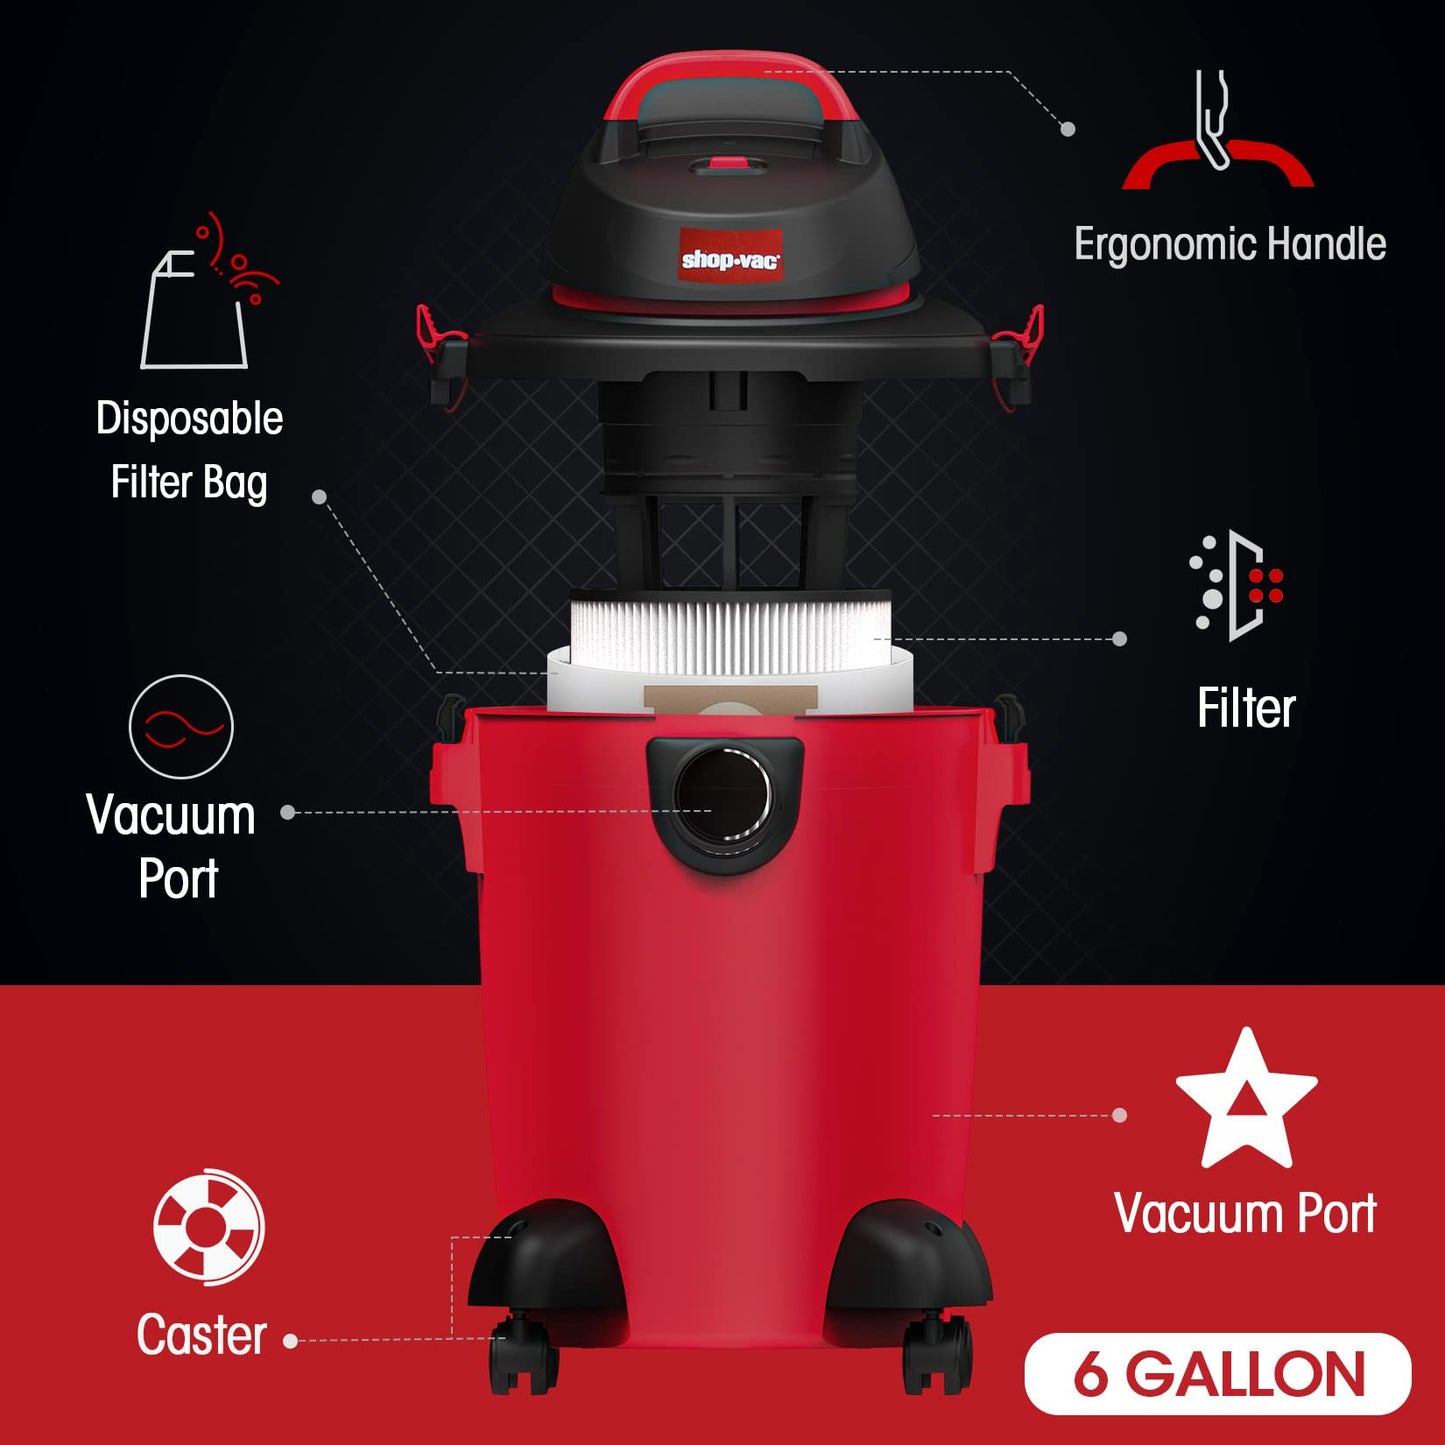 Shop-Vac 6 Gallon 3.0 Peak HP Wet Dry Vacuum, 3 in 1 Function Heavy-Duty Shop Vacuum with Filters, Attachments, Ideal for Home, Jobsite, Garage, Car